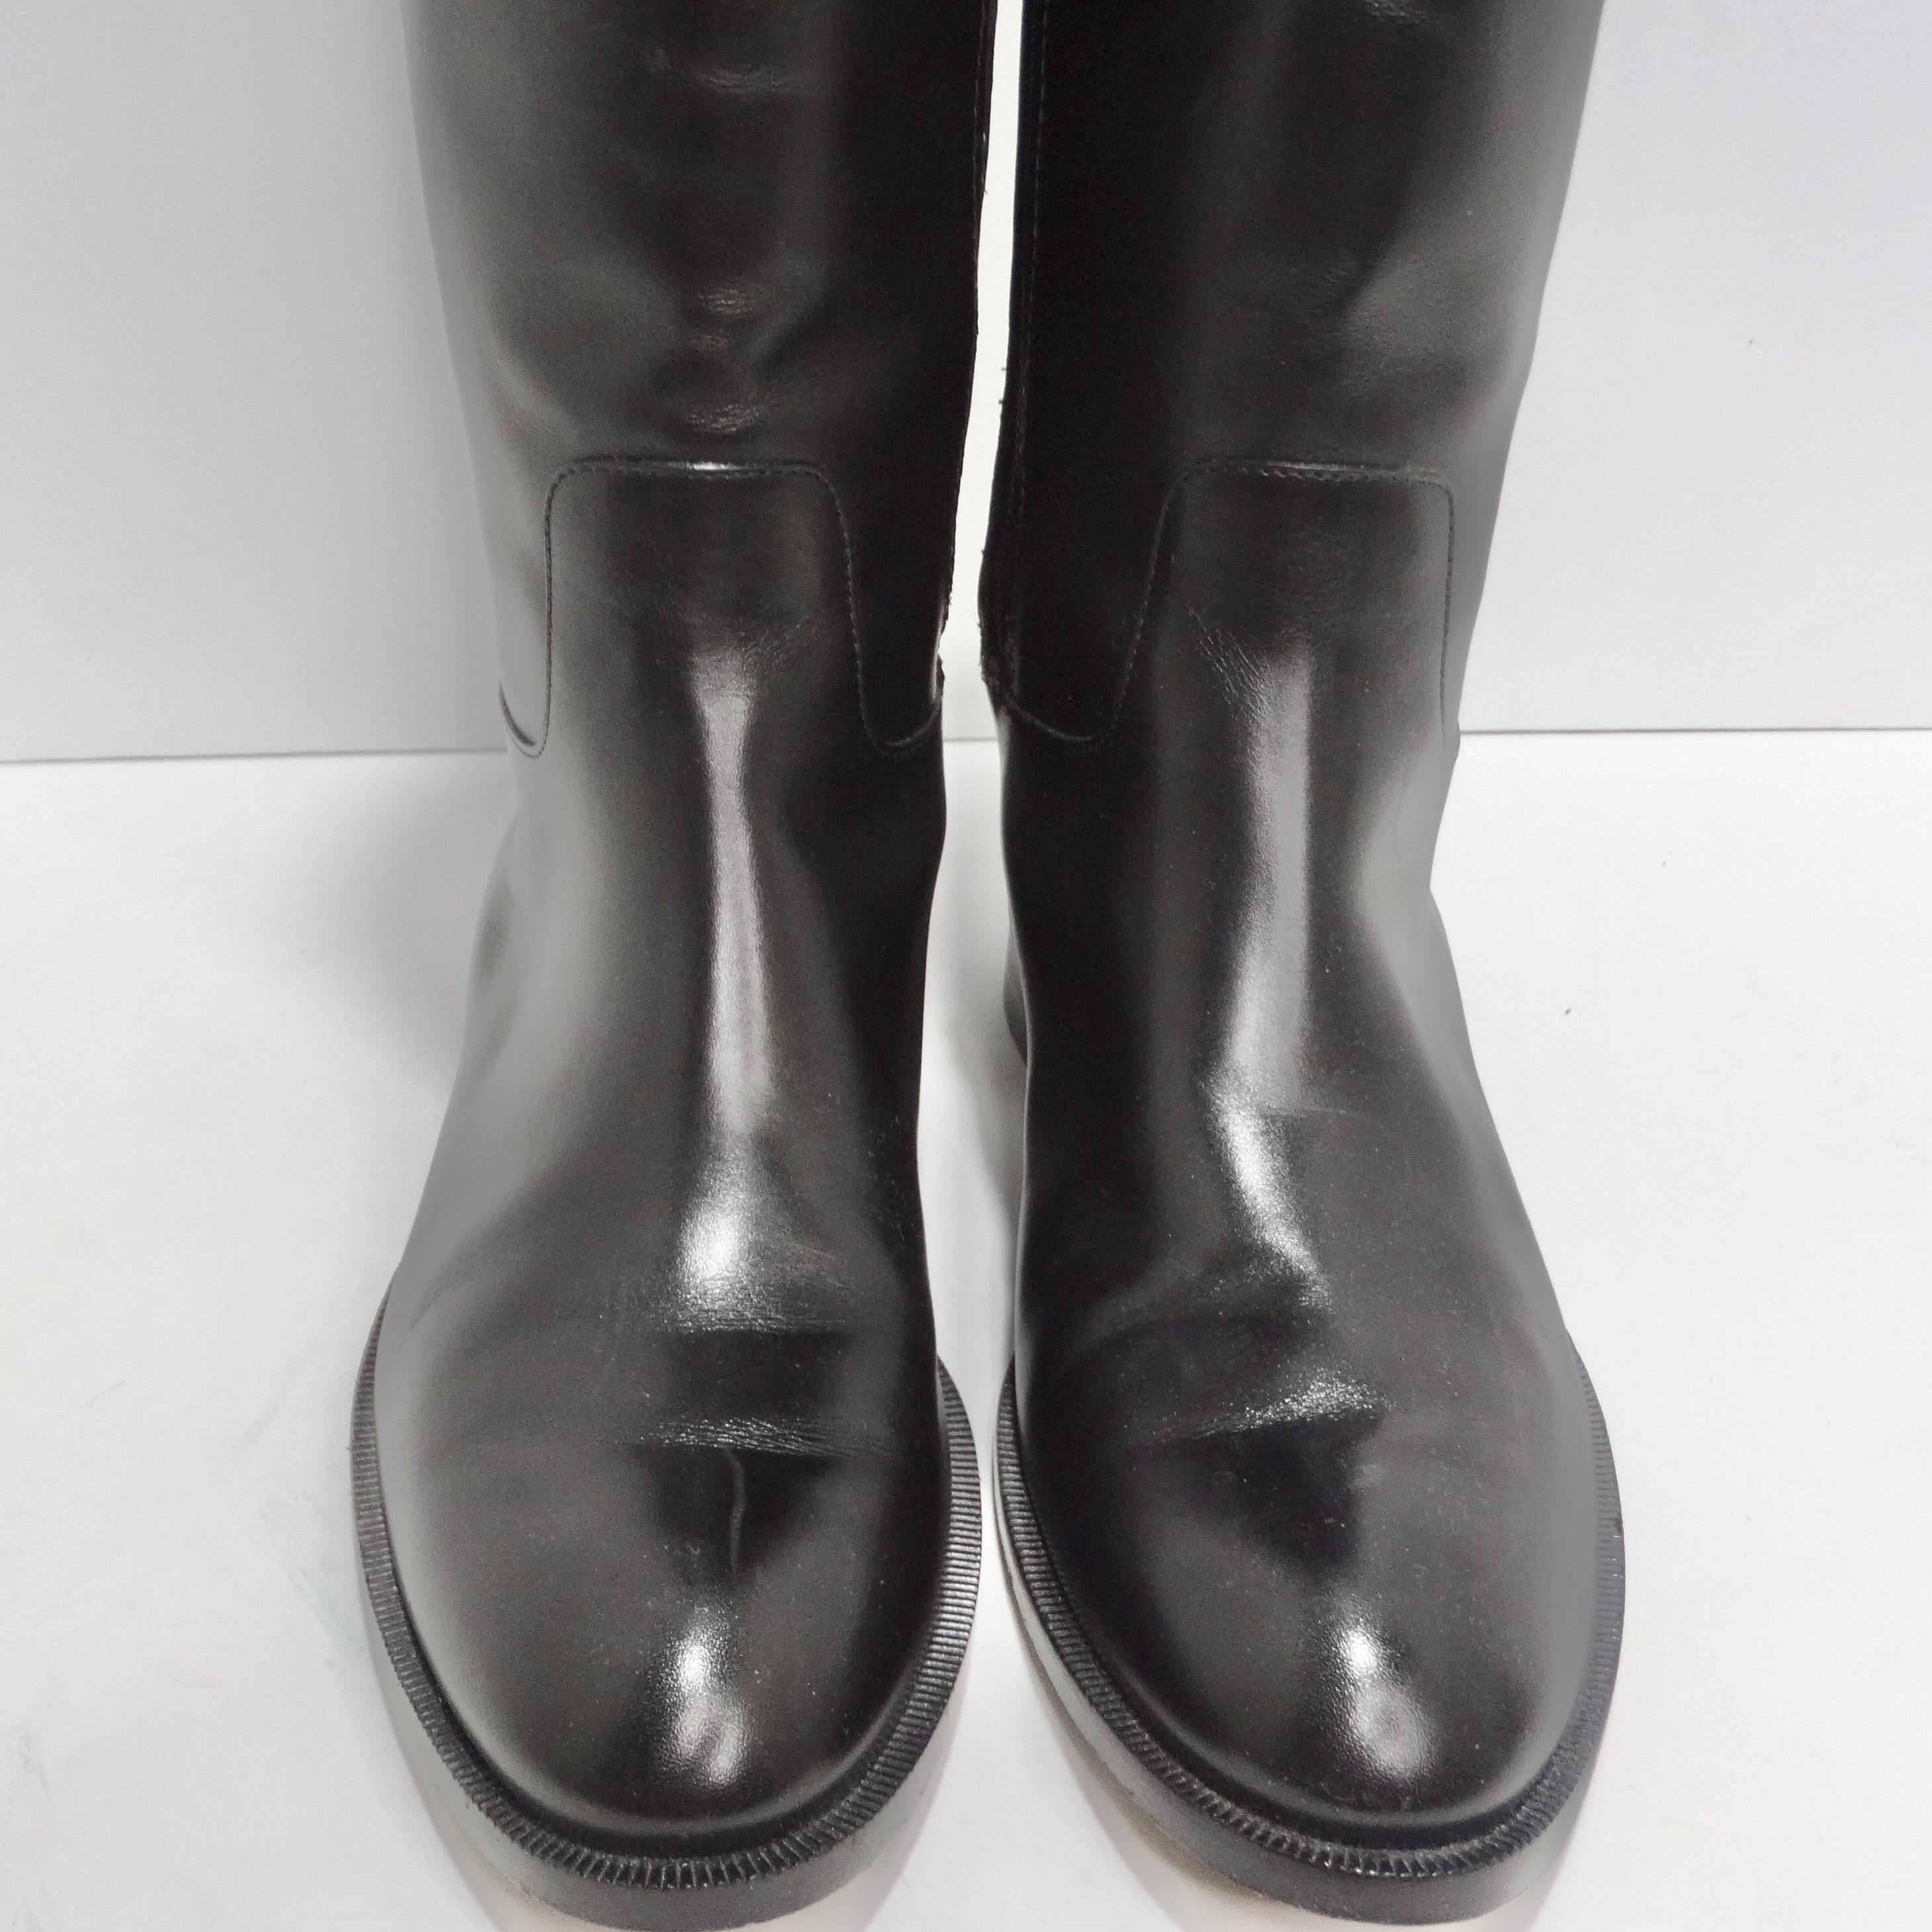  Louis Vuitton Heritage Black Leather Riding Boots In Good Condition For Sale In Scottsdale, AZ